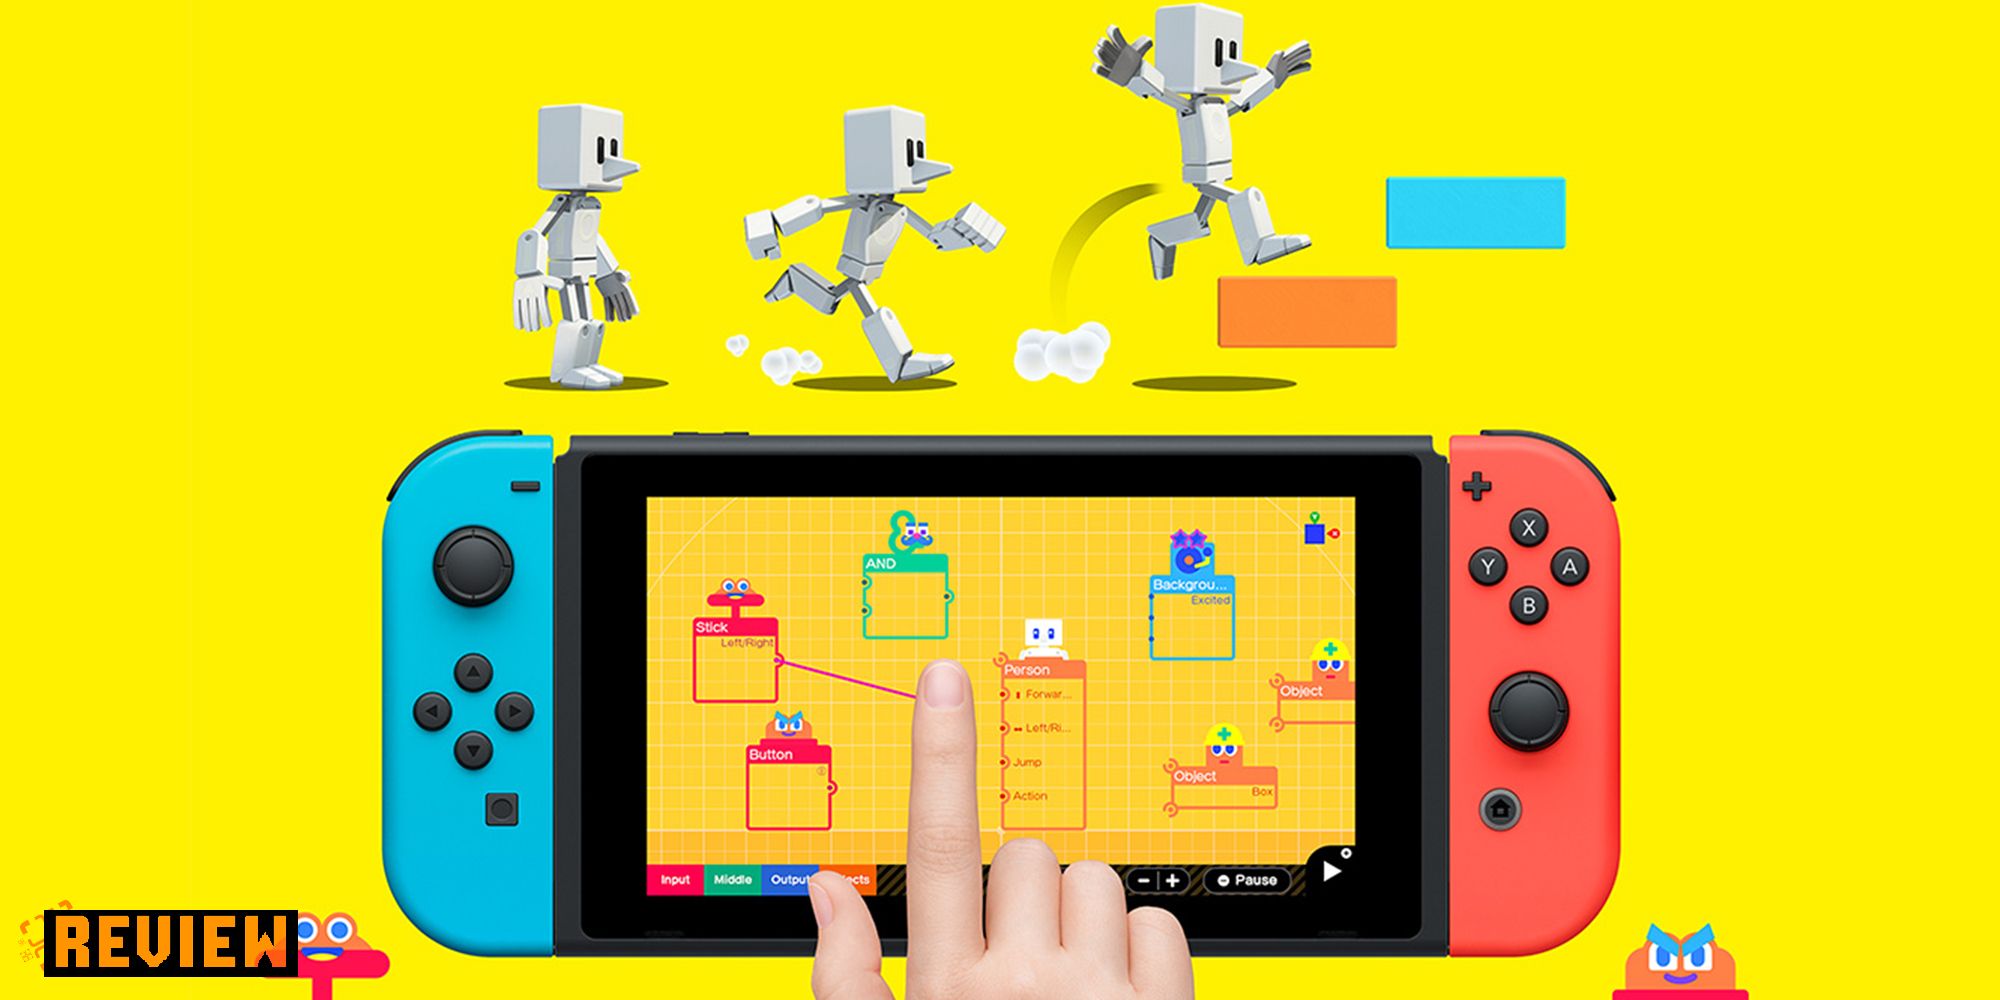 Game art for Game Builder Garage and game playing on a Nintento Switch.